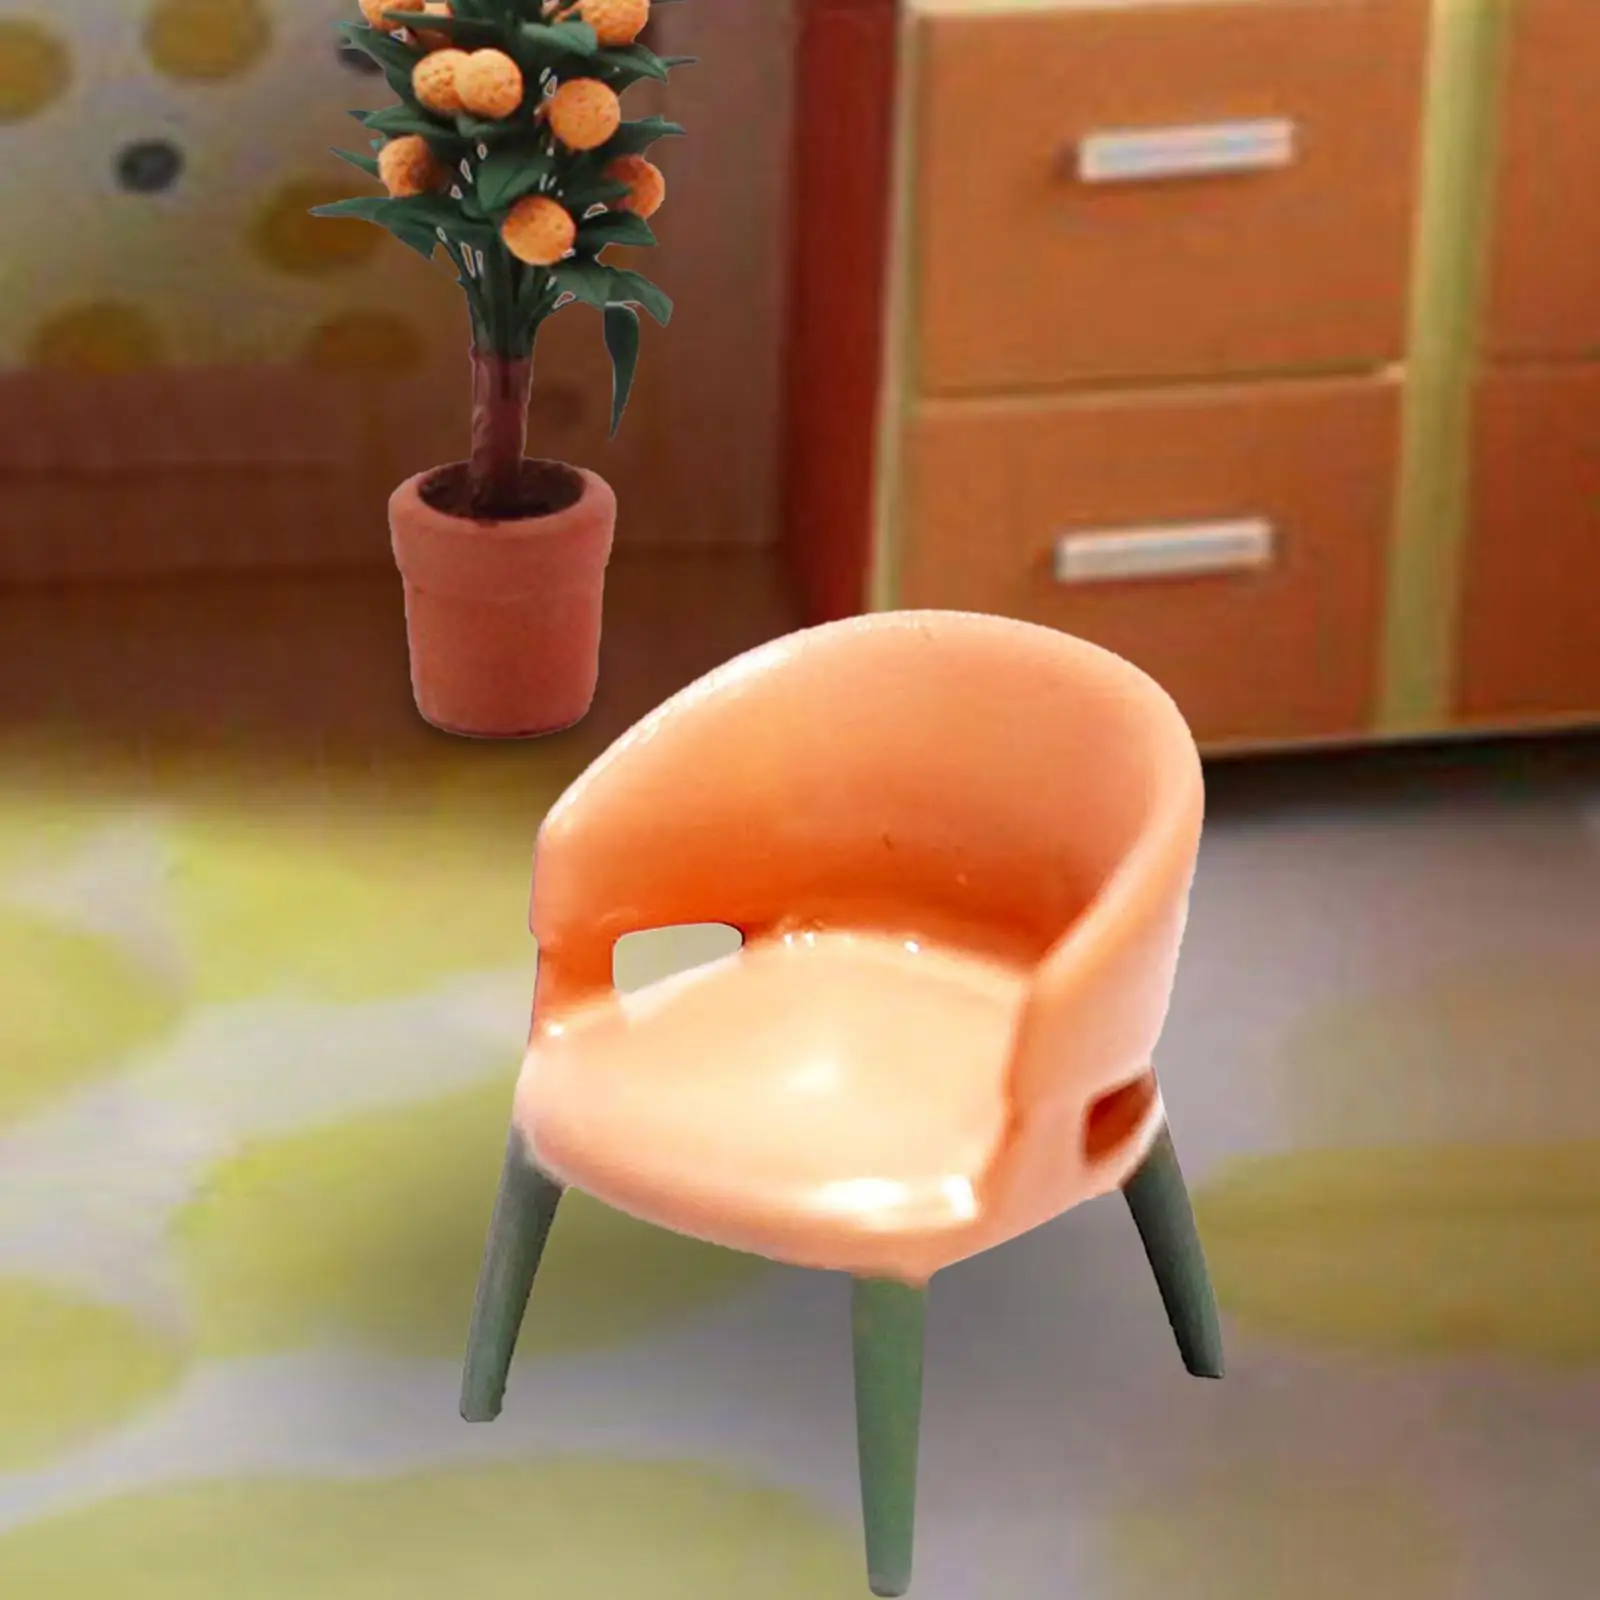 Miniature 1/87 Scale Armchair Resin for DIY Projects Decor Photography Props